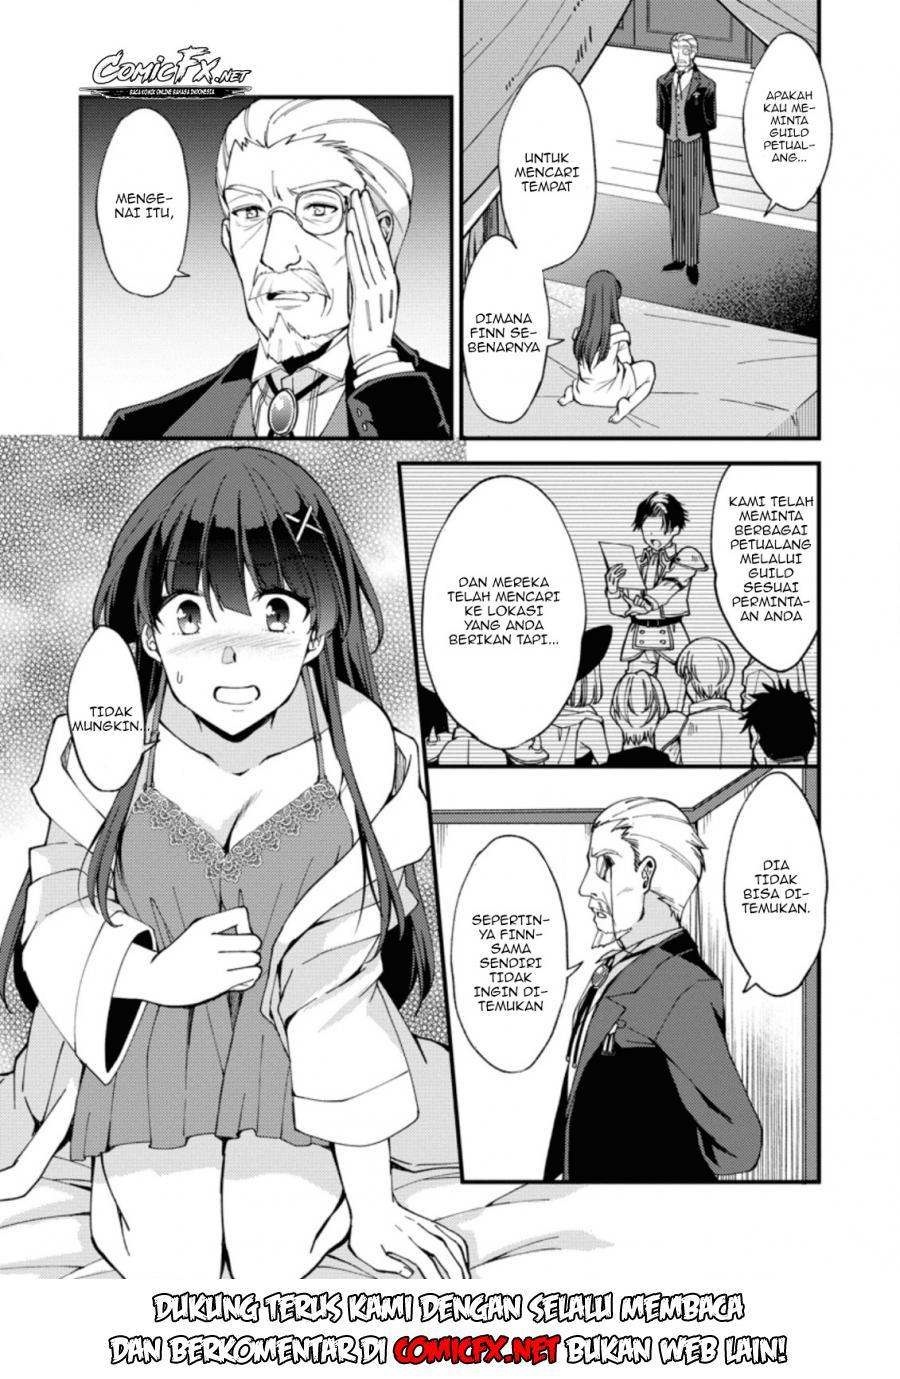 A Sword Master Childhood Friend Power Harassed Me Harshly, So I Broke off Our Relationship and Make a Fresh Start at the Frontier as a Magic Swordsman Chapter 02-2